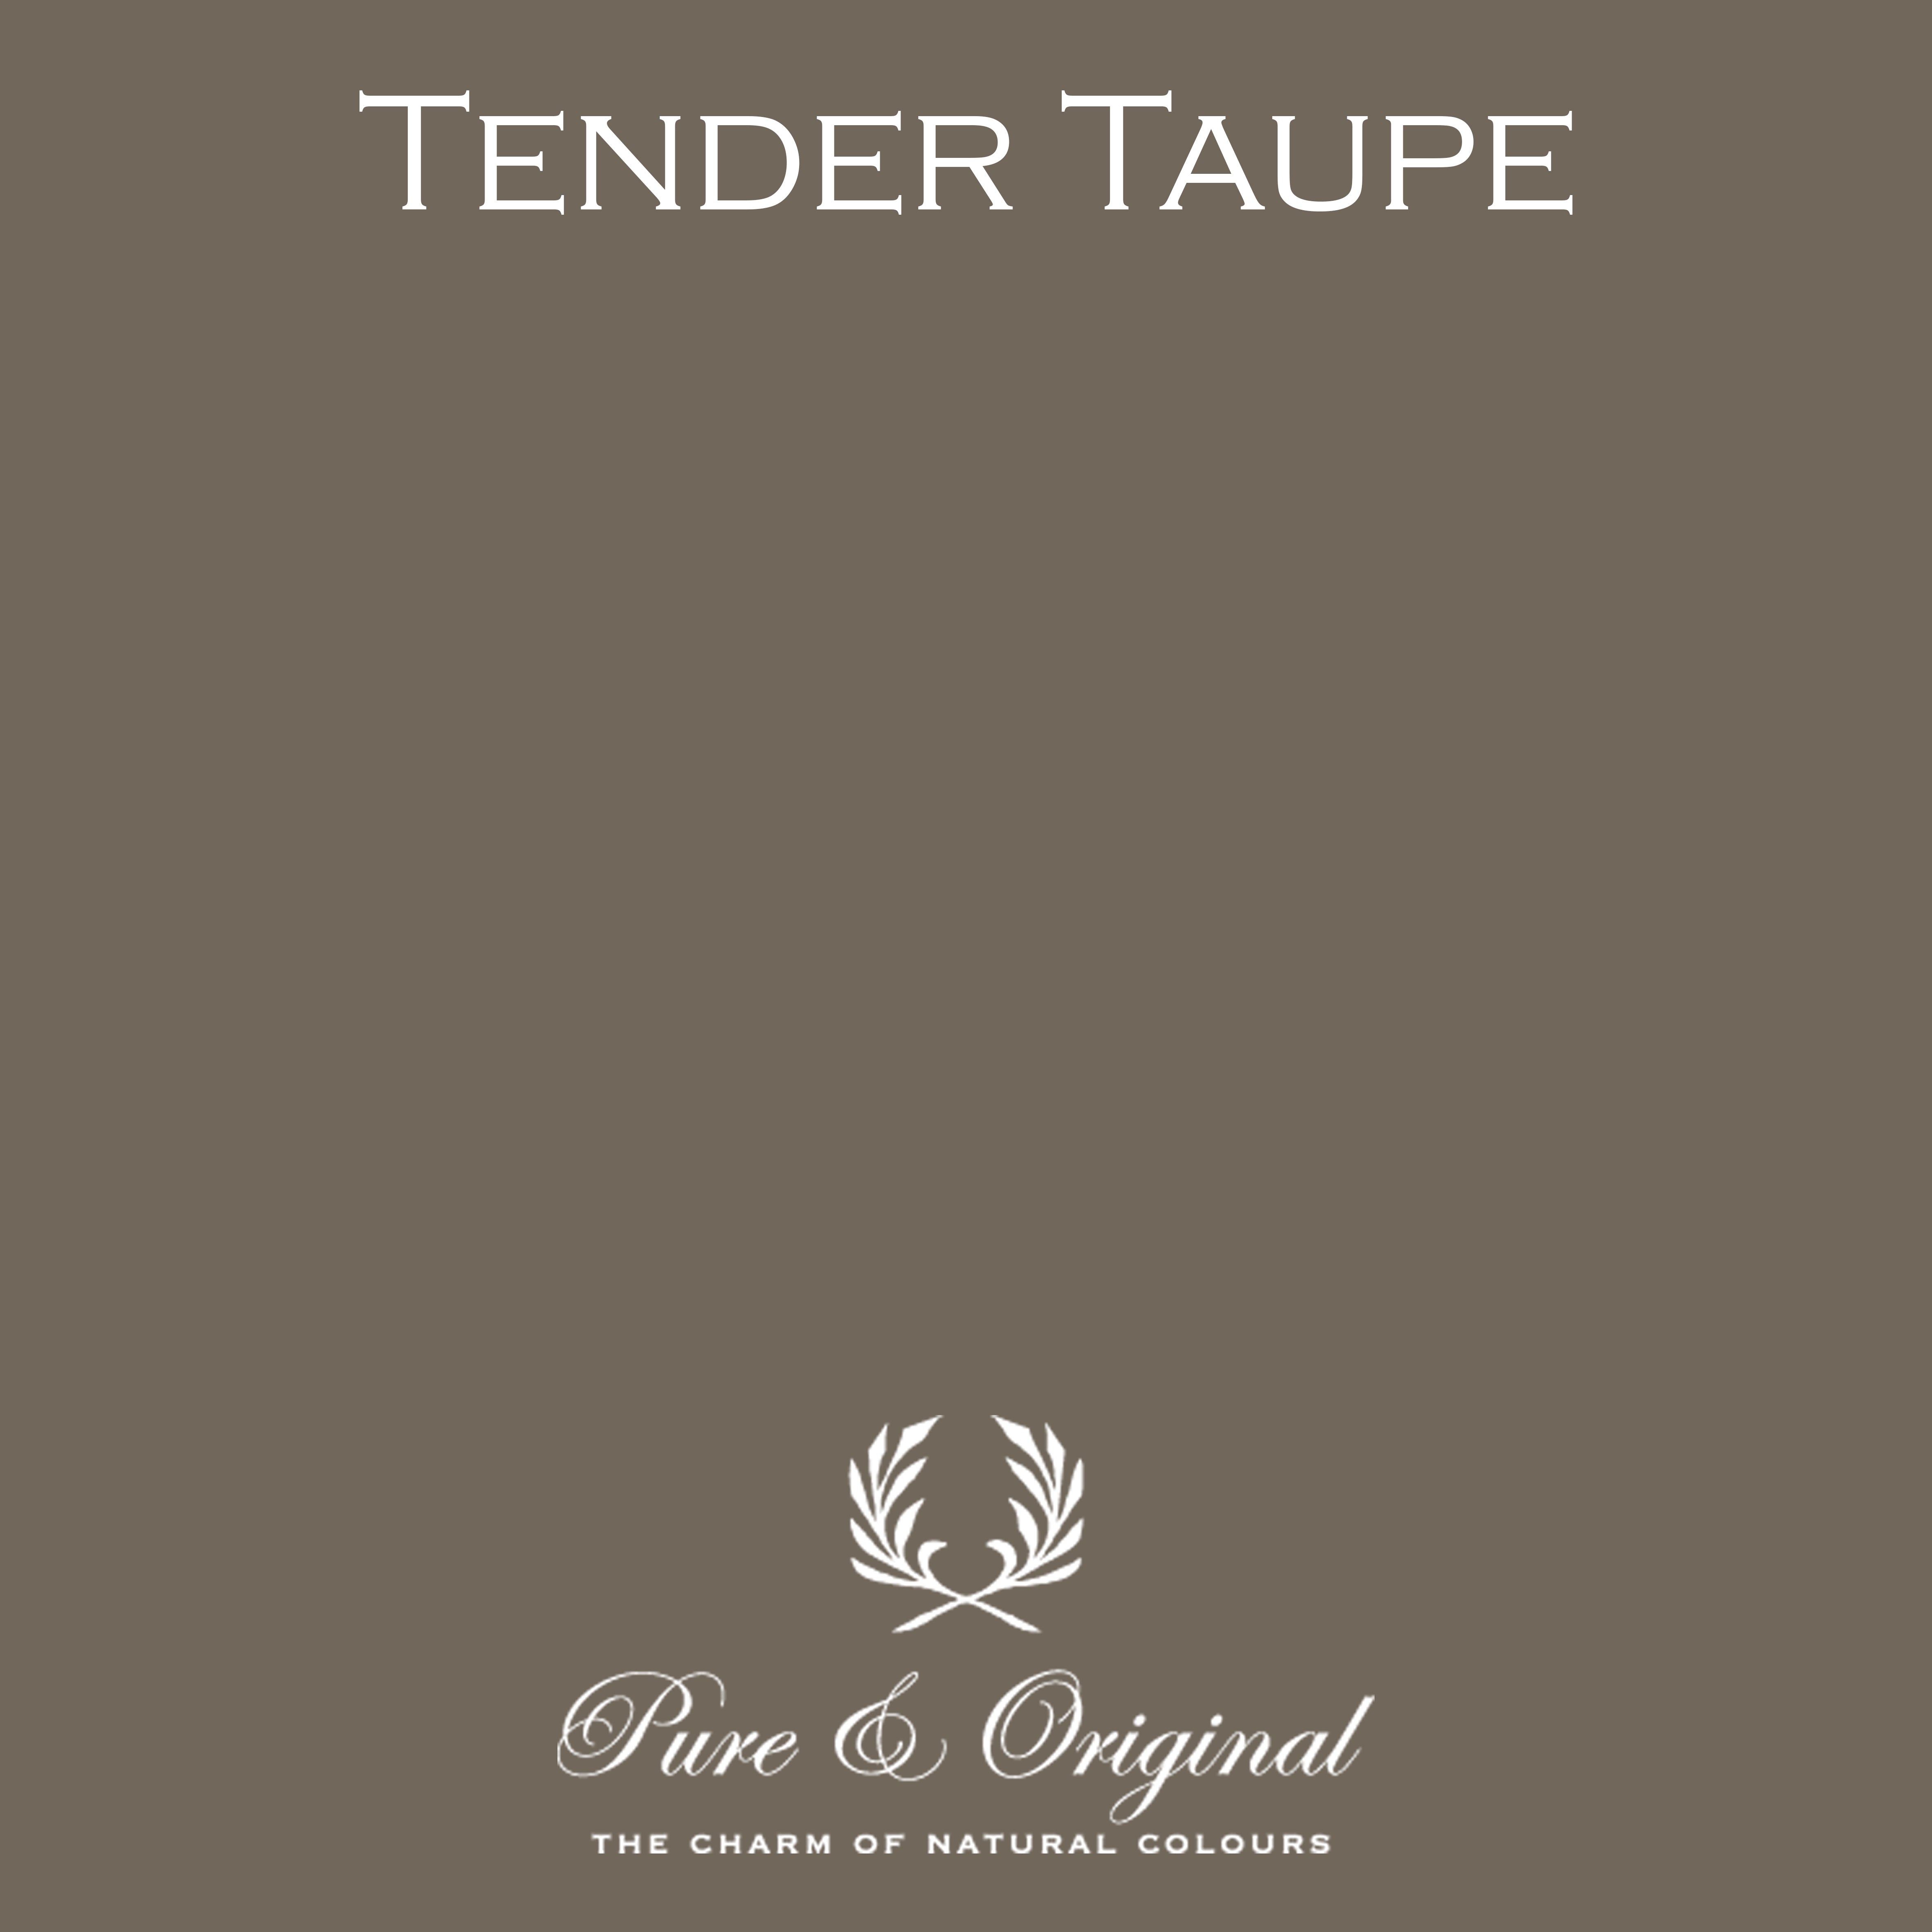 Traditional Paint Eggshell "Tender Taupe"